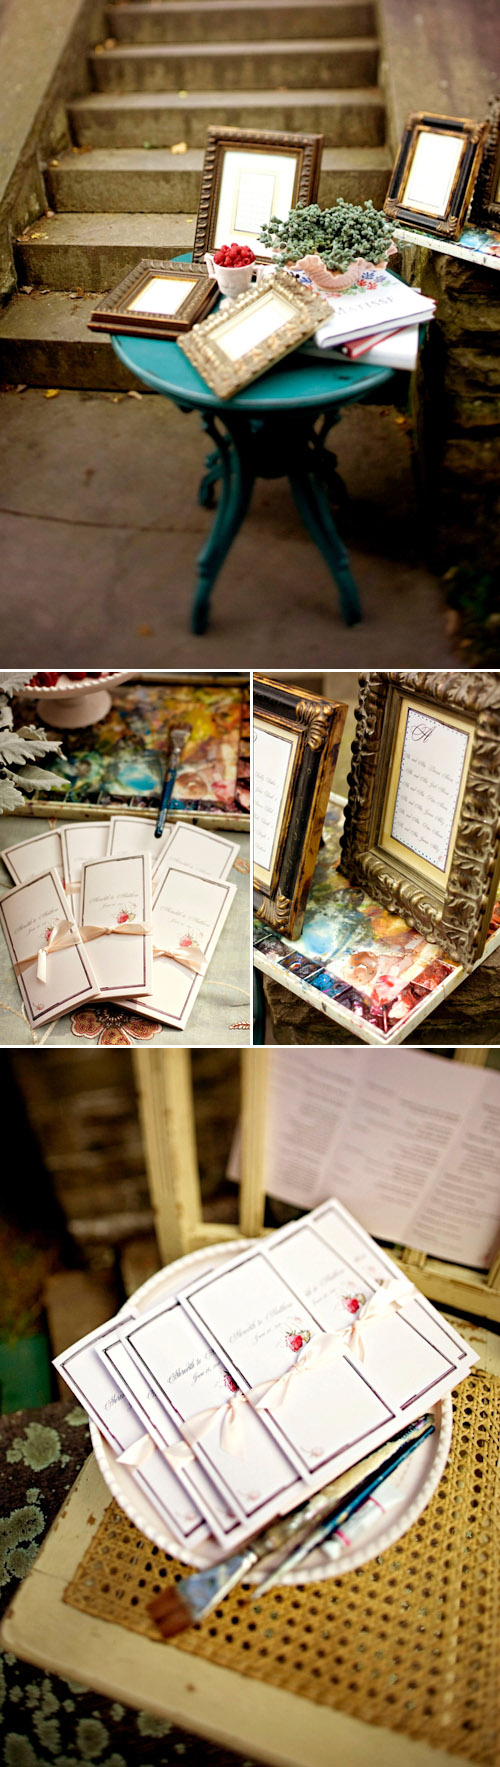 Watercolor inspired wedding decor by Momental Designs, photos by Darker Shades of Brown Photography | junebugweddings.com